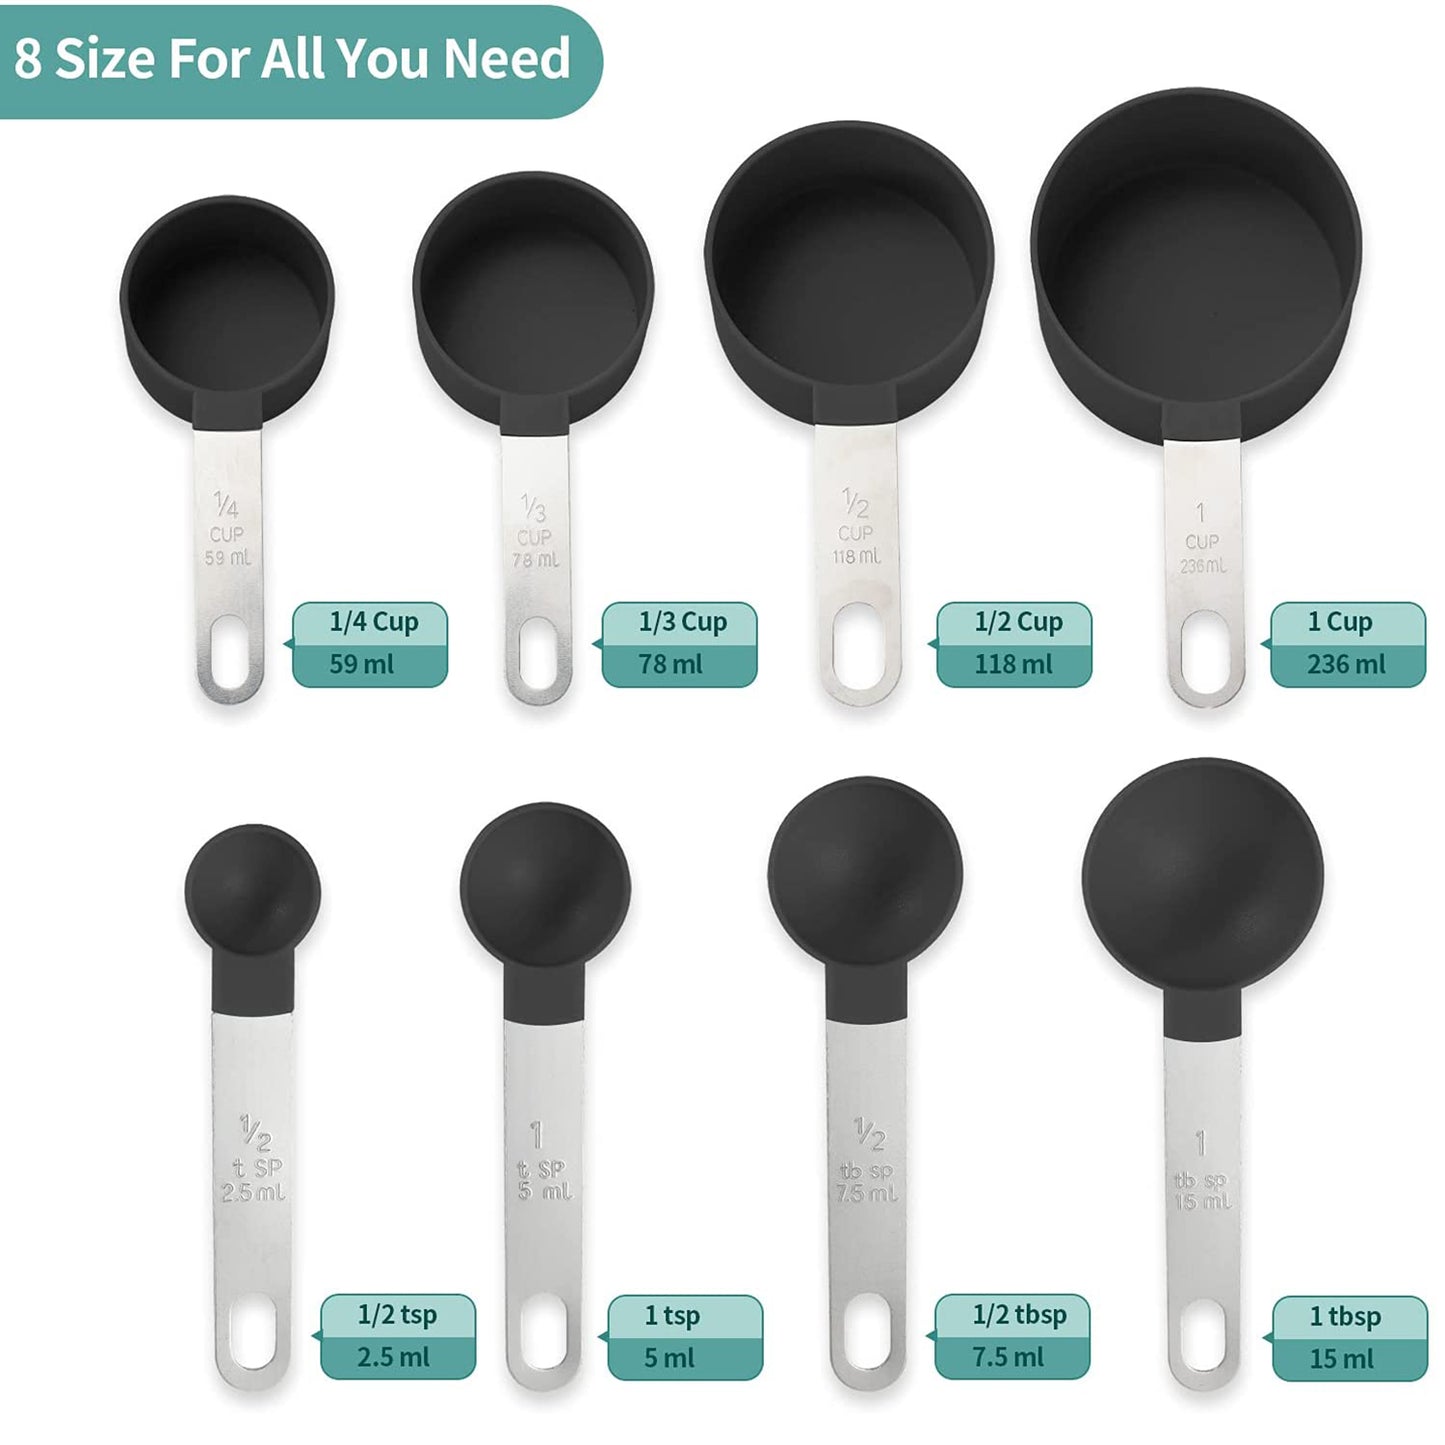 SYNGAR Black Measuring Cups and Spoons Set, Stackable Kitchen Tools & Gadgets for Dry/Wet Ingredients, Home Essentials, Measuring Cups for Baking, Cooking, Teaspoons Set, 8-Piece